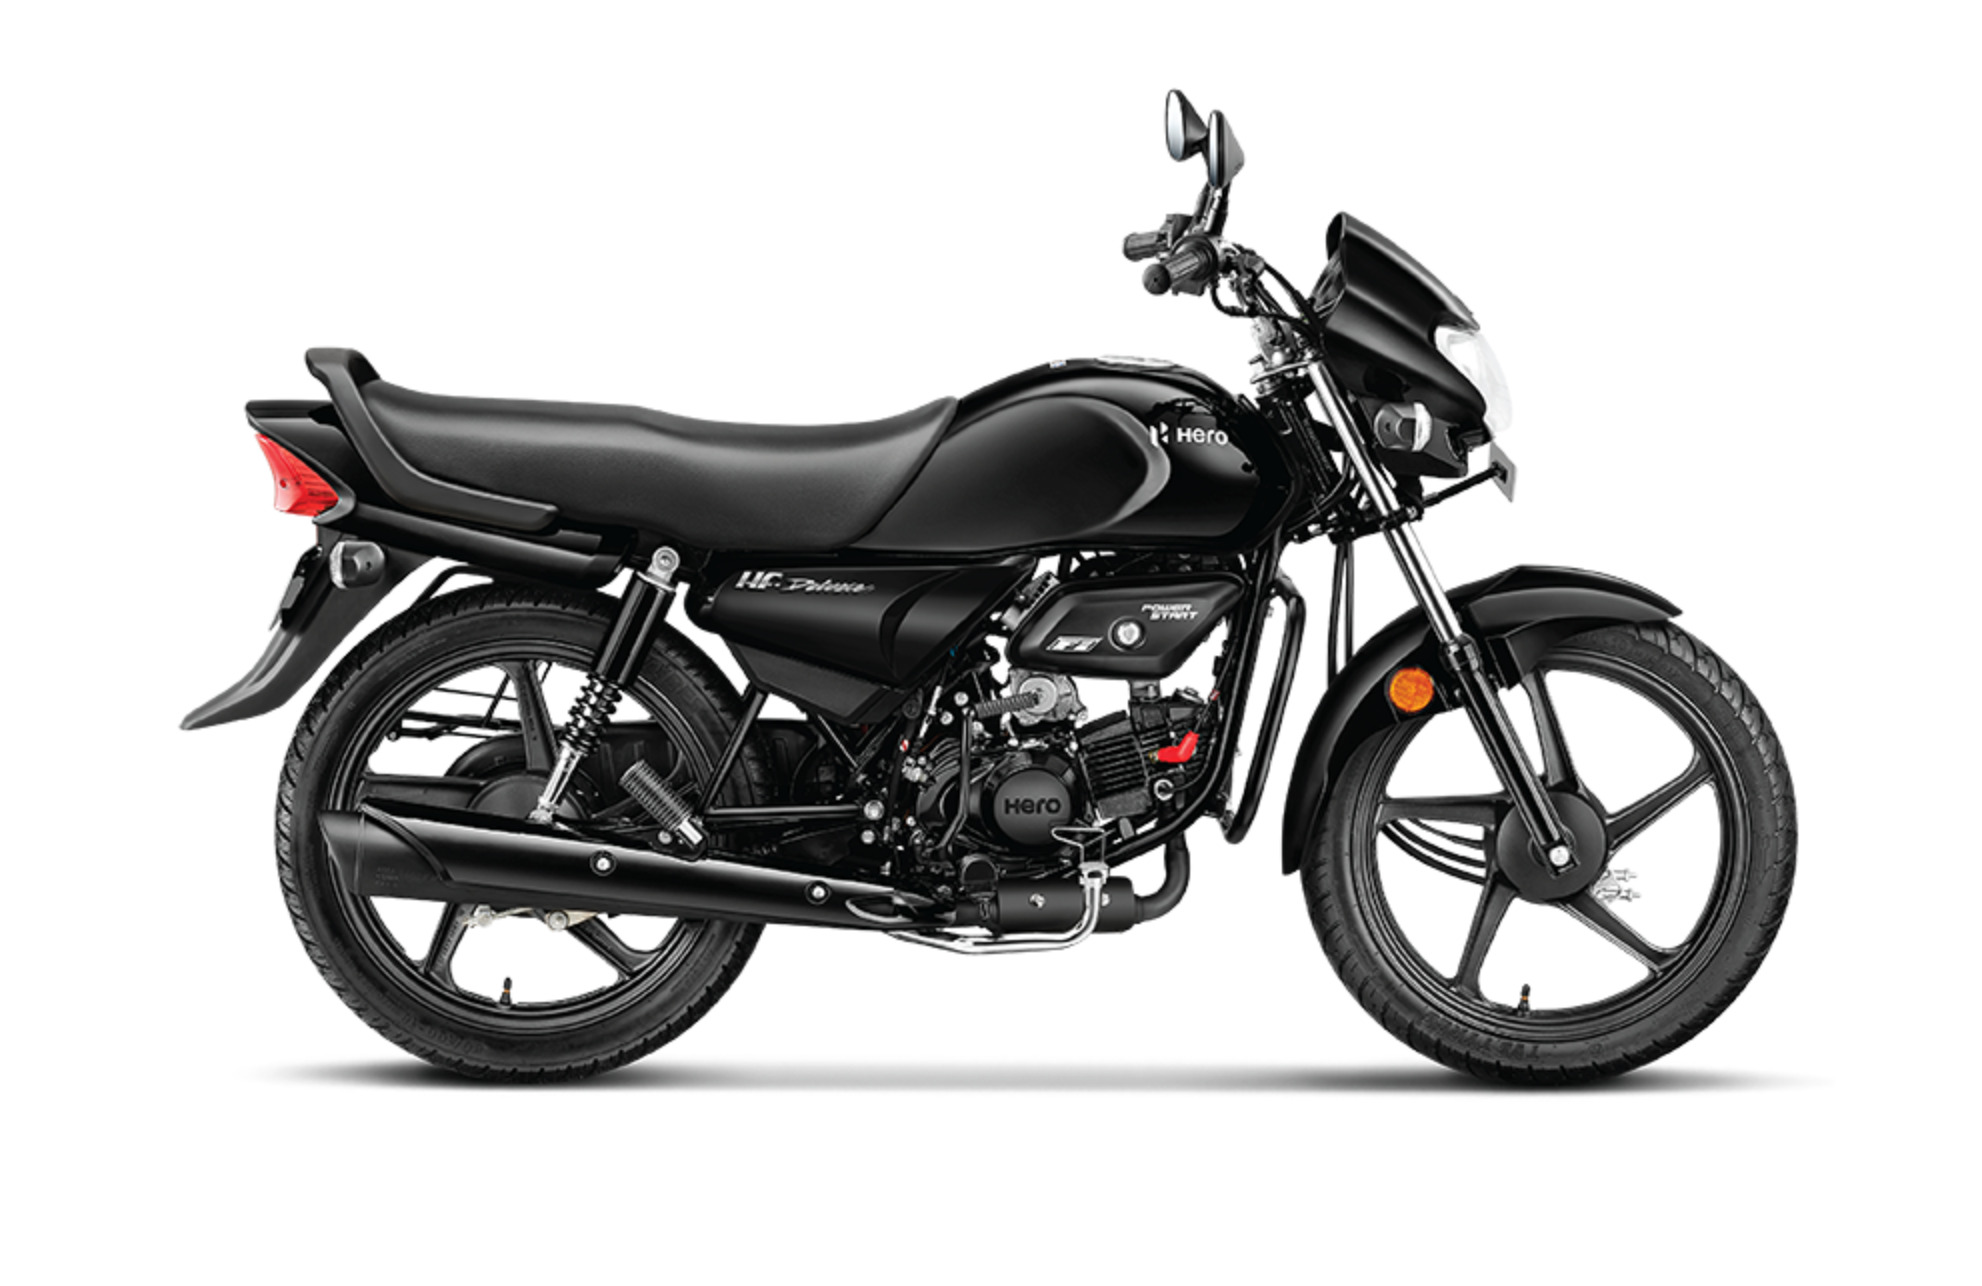 New All-Black Hero HF Deluxe Launched in India at Rs 60,760 - back